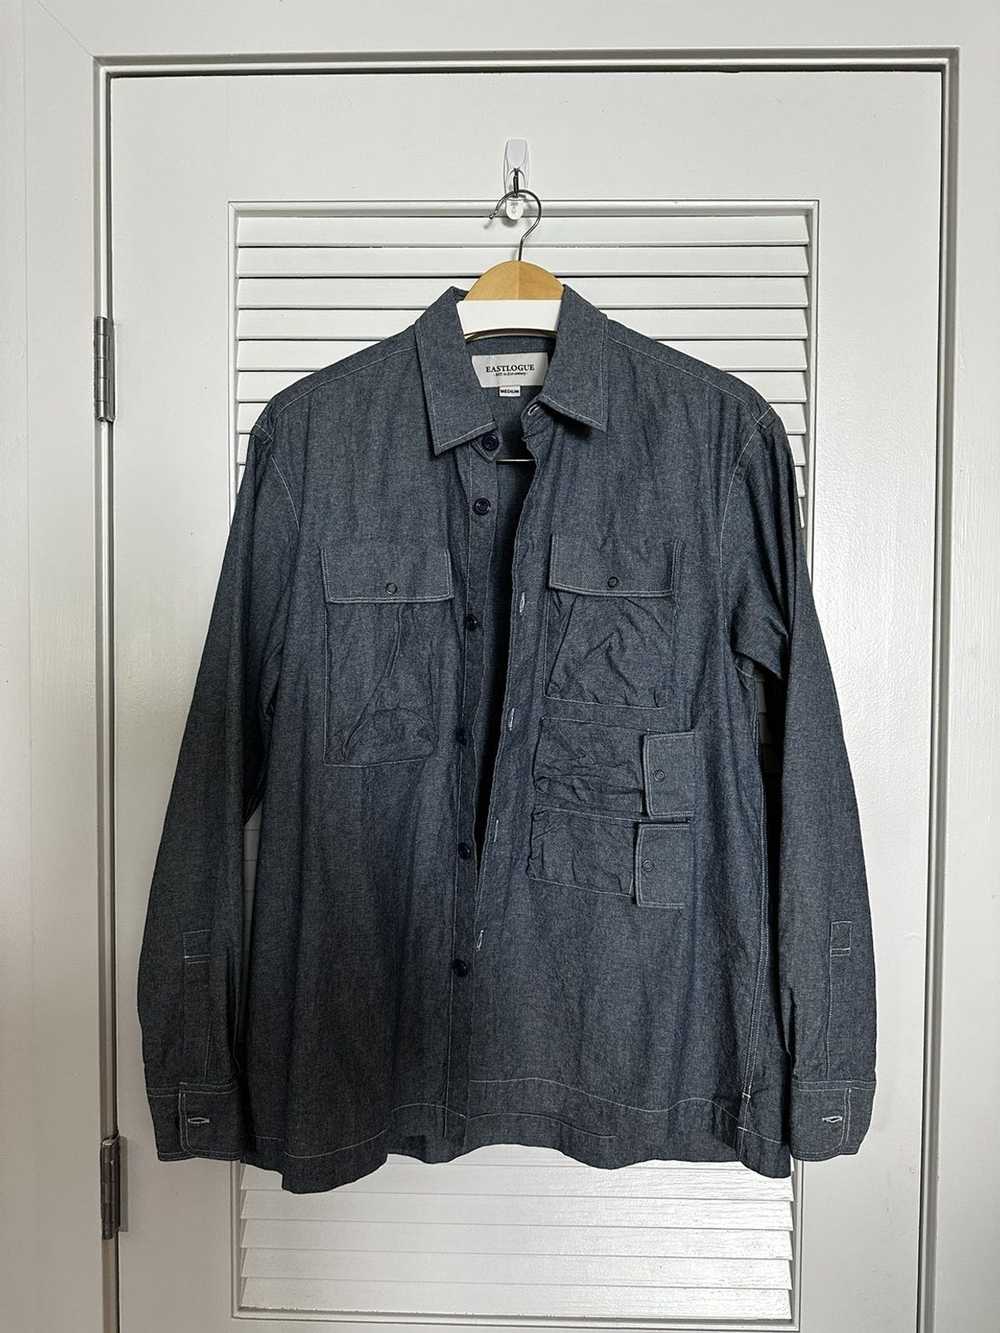 Eastlogue Utility Field Shirt Blue Chambray Size M - image 2